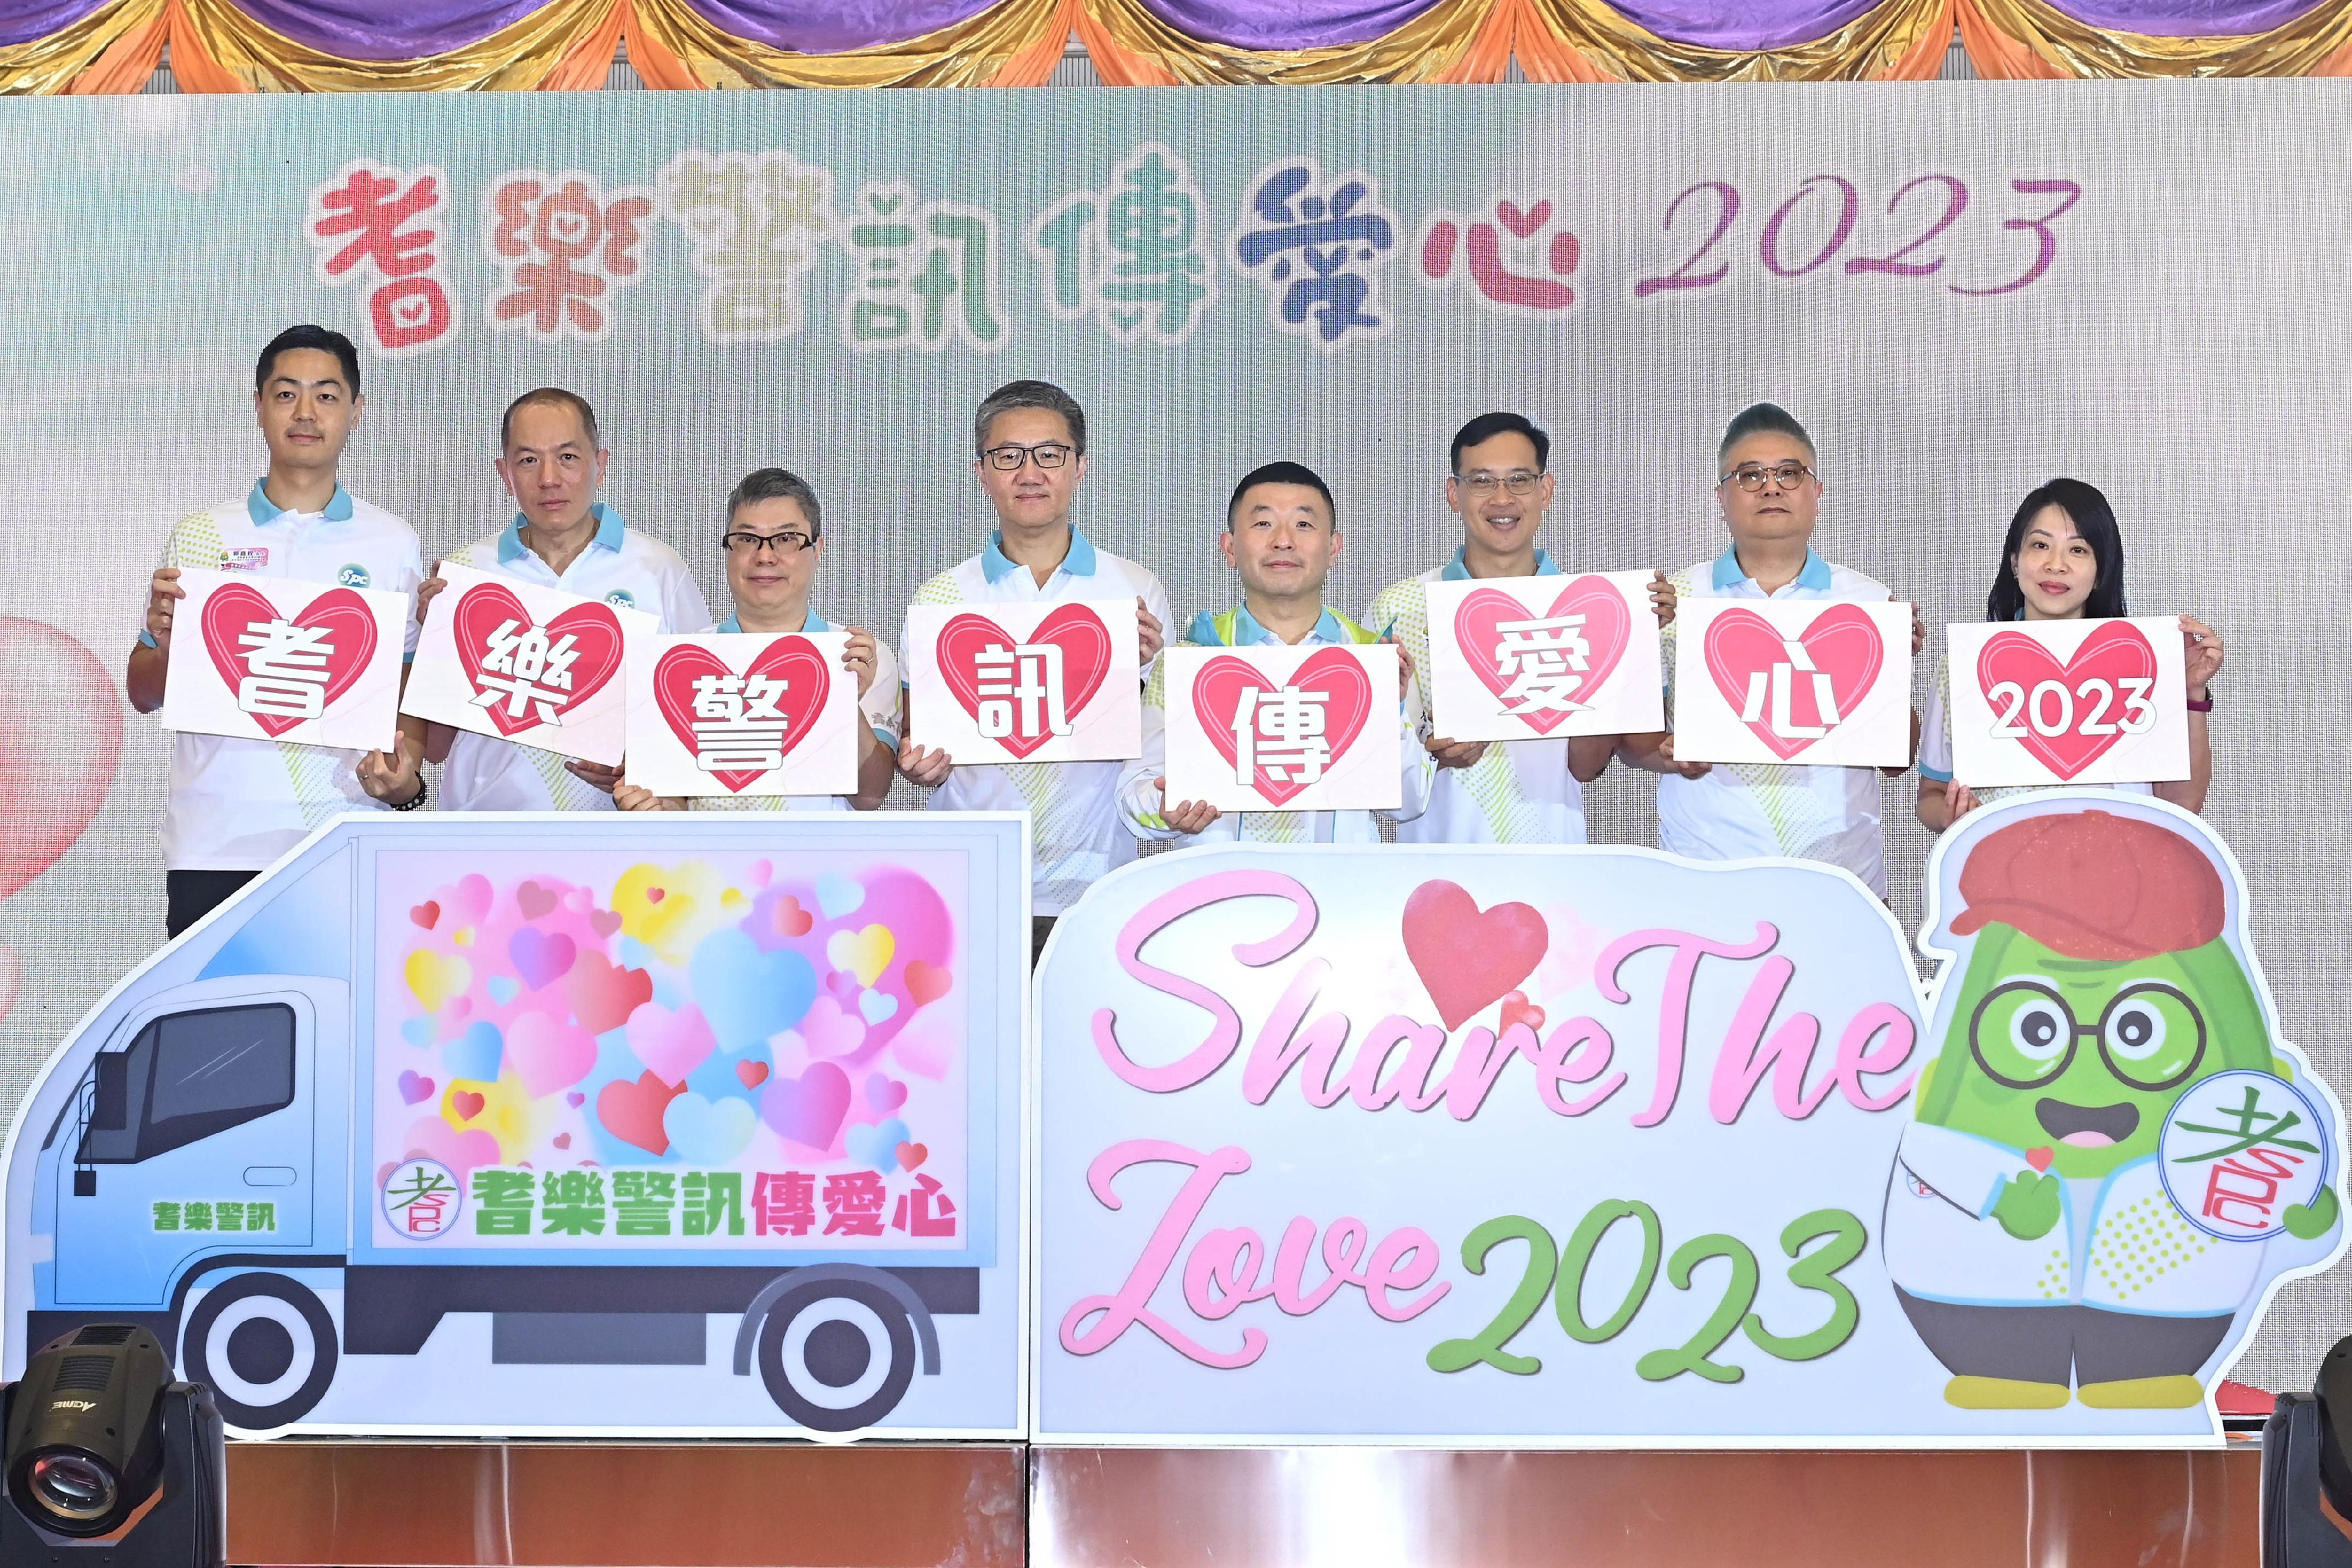 Senior Police Call (SPC) launched the “SPC Share the Love” today (May 13). Photo shows the Commissioner of Police, Mr Siu Chak-yee (fourth left); the Director of Operations, Mr Chan Joon-sun (third right); representatives of SPC Central Advisory Board, Dr Albert Wong (fourth right); Dr Dominic Chu Chun-ho (third left); Mr Wilfred Ng Sau-kei (second left); and Dr Malcolm Lam Wai-wing (second right); the Chairperson of SPC Central Advisory Board cum the Regional Commander of Hong Kong Island, Mr Kwok Ka-chuen (first left); and the Vice-Chairperson of SPC Central Advisory Board cum the Chief Superintendent of Public Relations Wing, Ms Tsang Shuk-yin (first right), officiating at the kick-off ceremony.